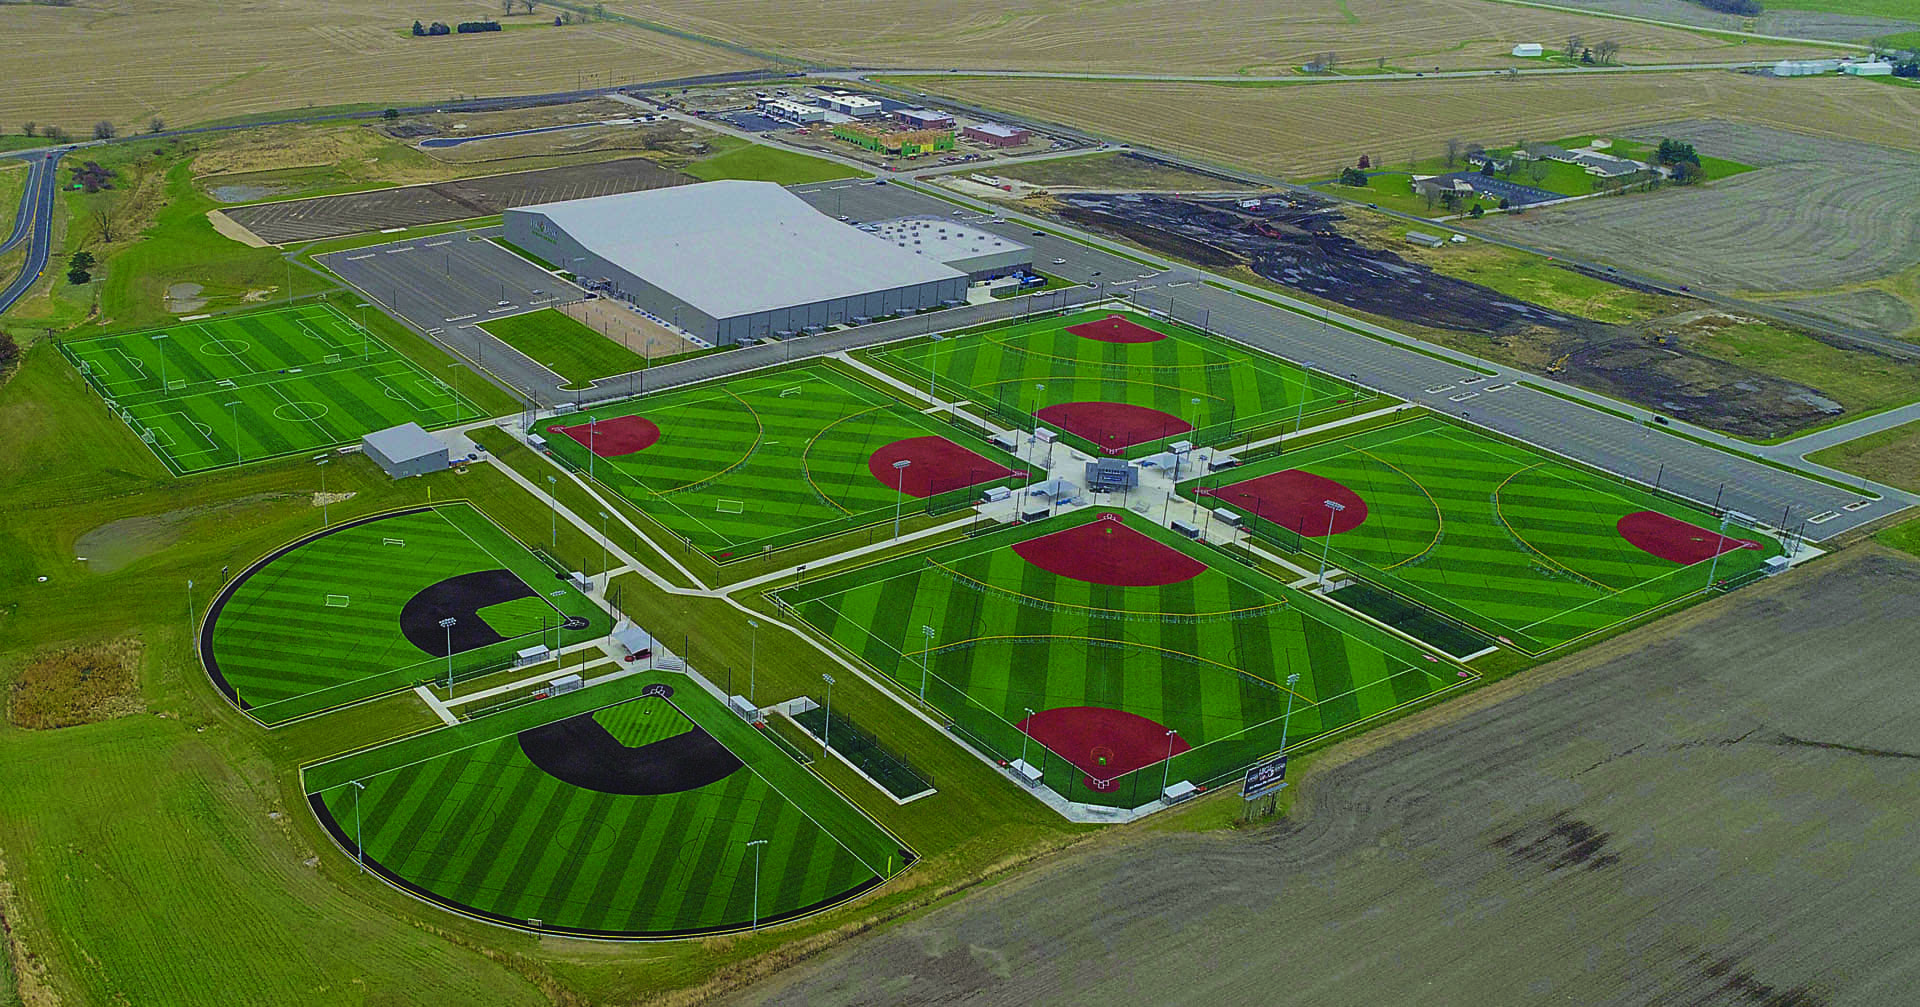 Aerial view of baseball fields.